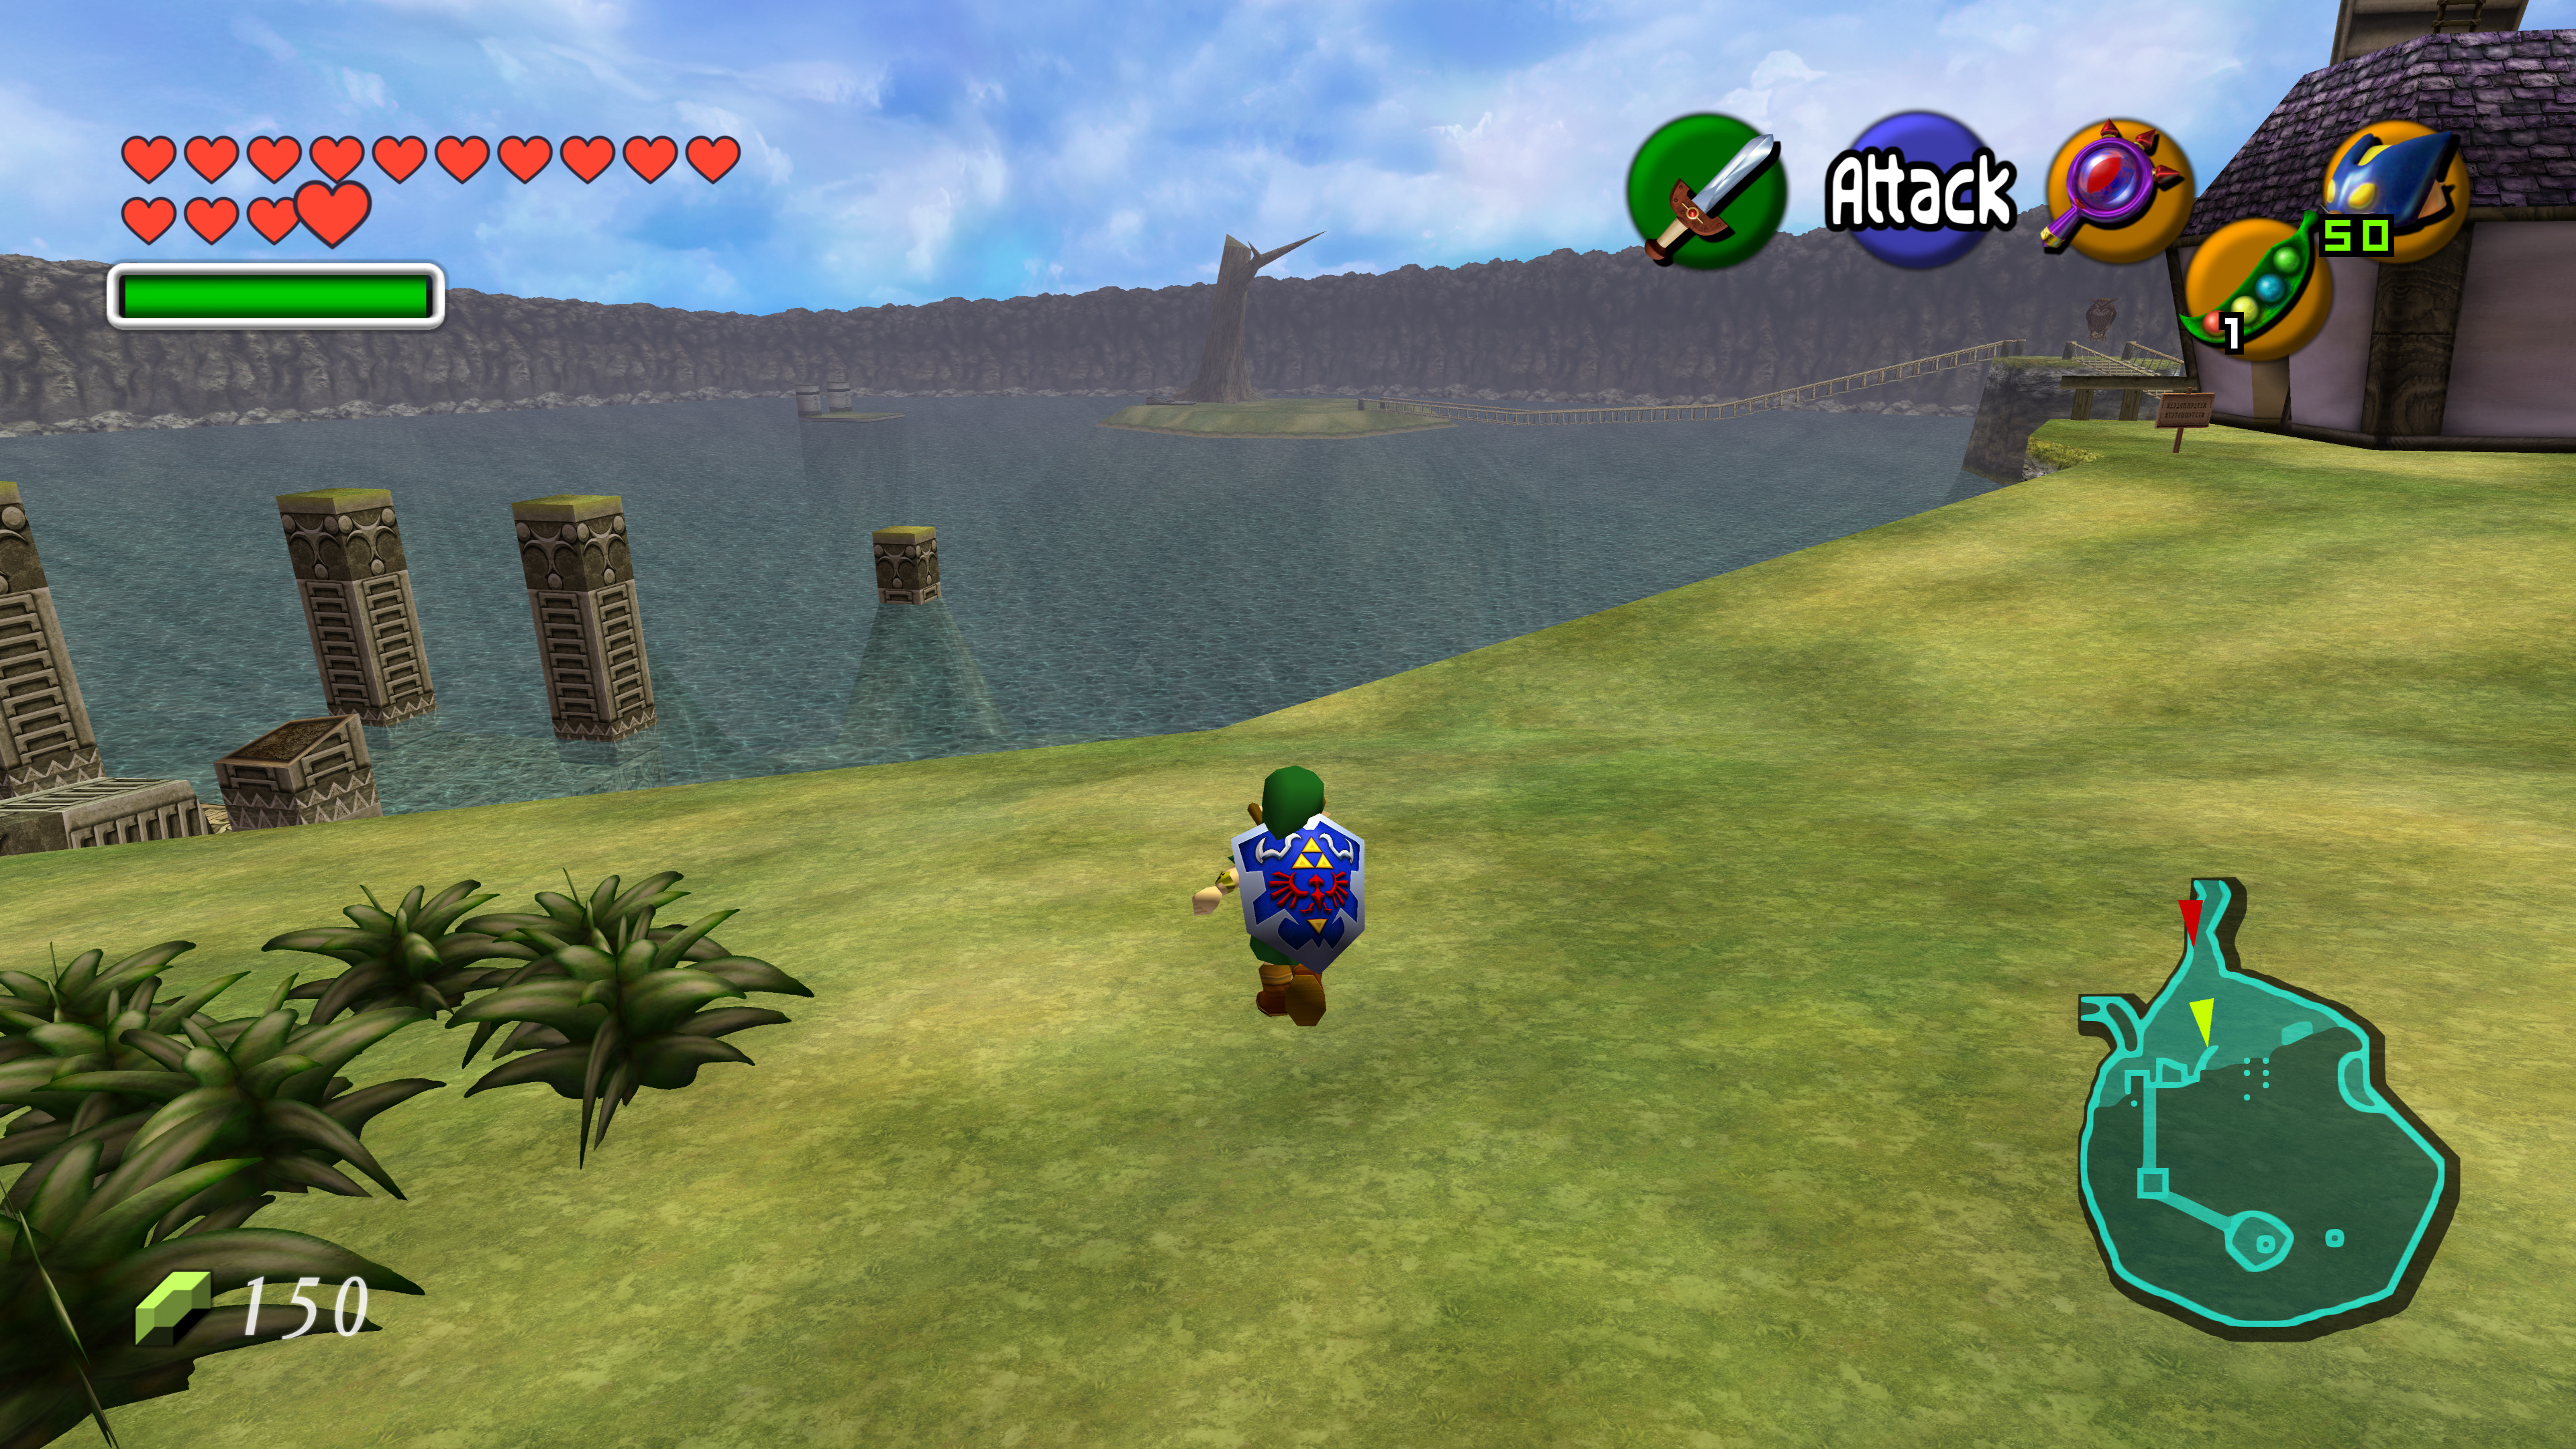 Zelda: Ocarina of Time's unofficial PC port now supports Mac OS